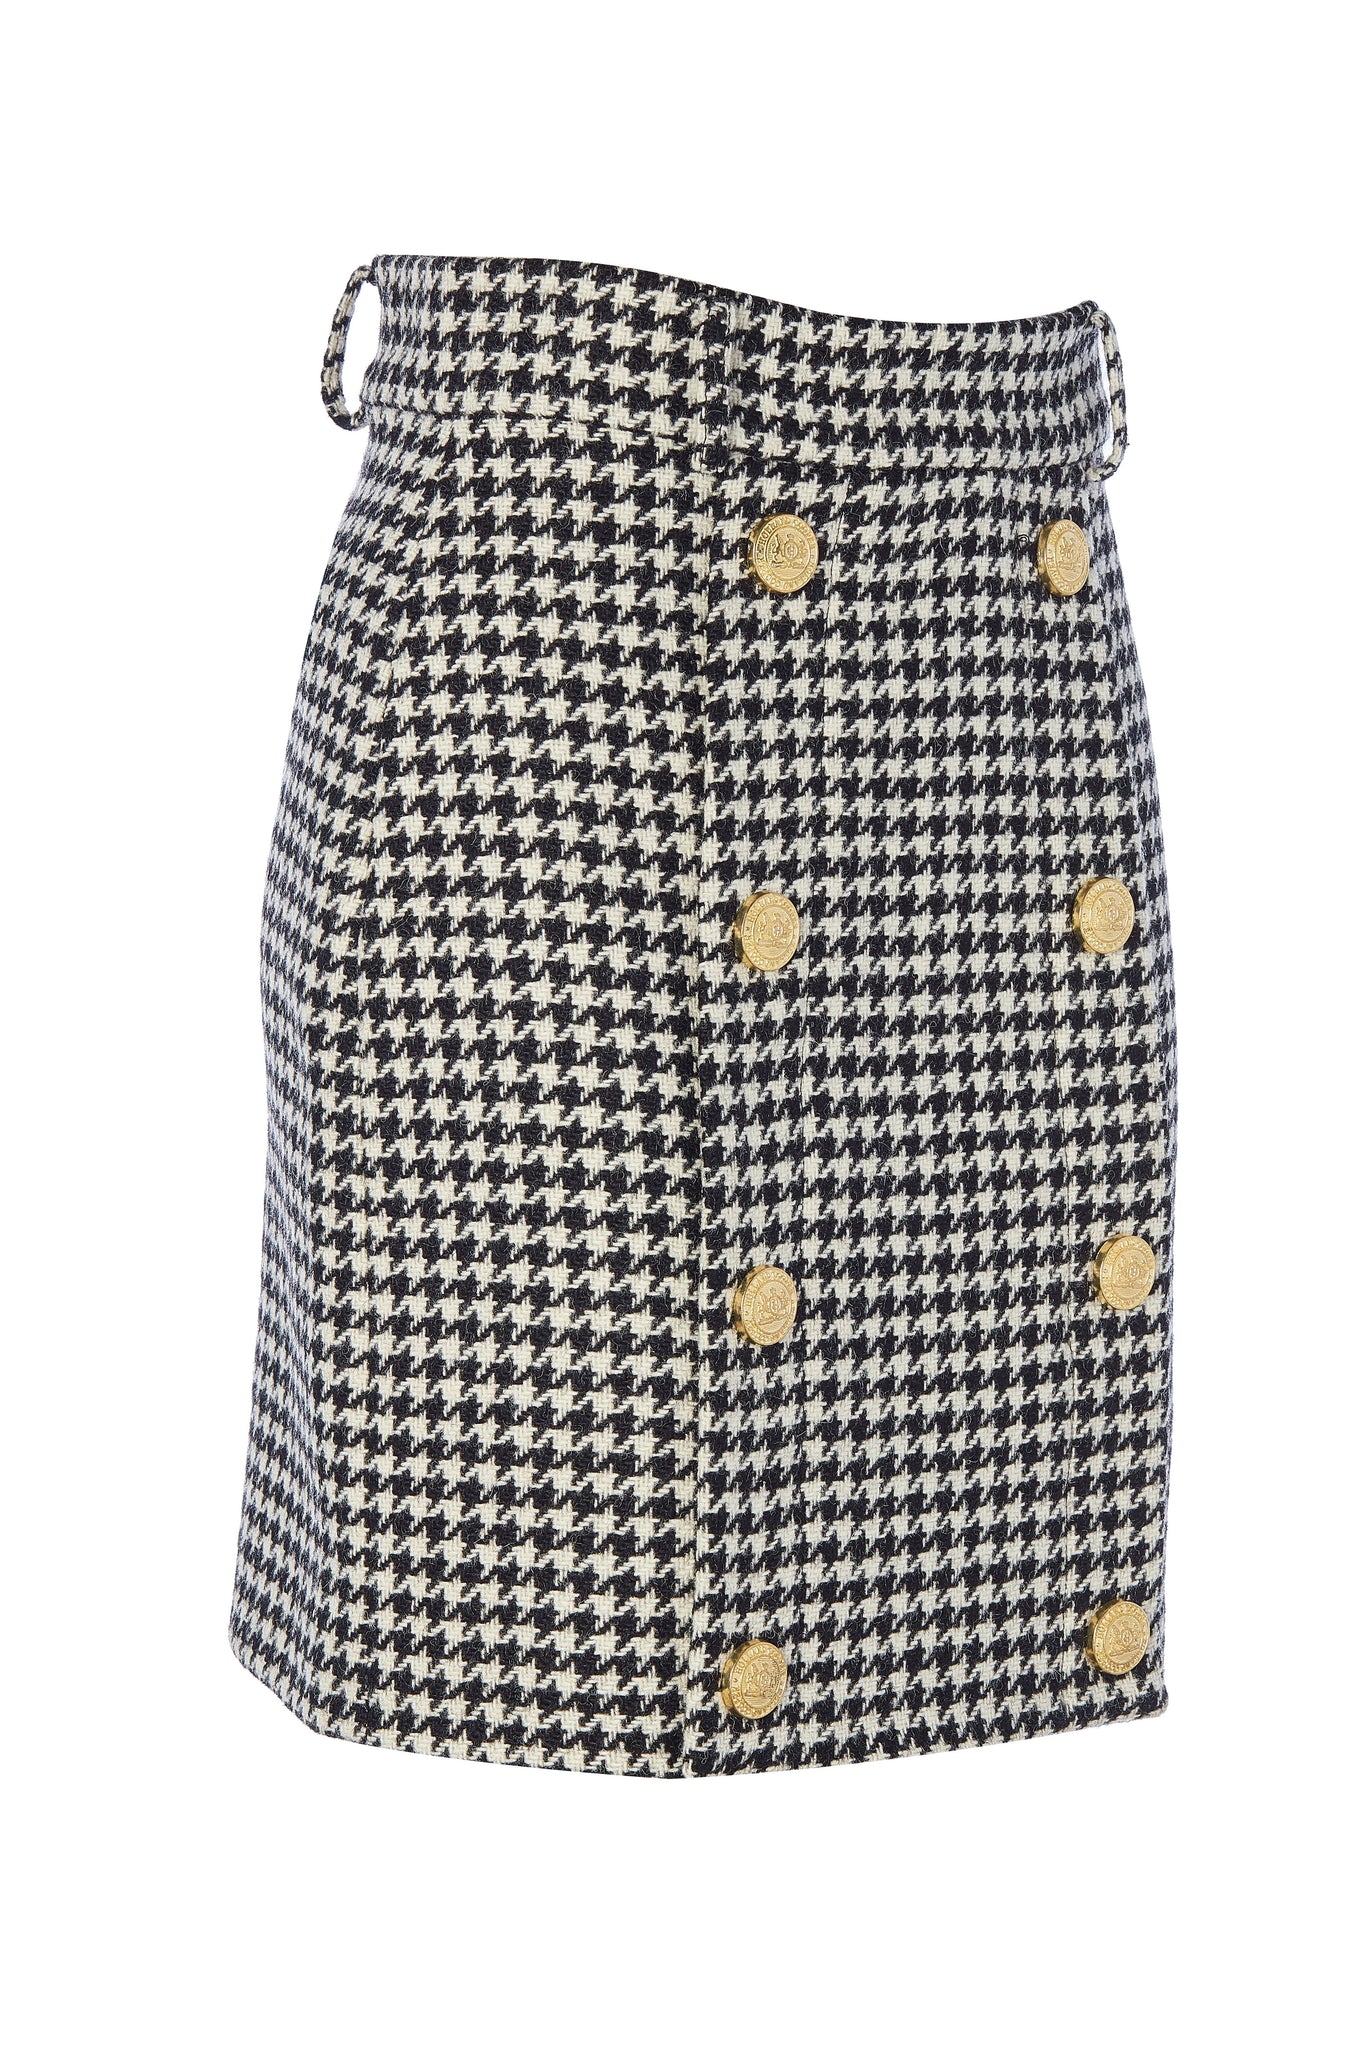 womens black and white houndstooth wool pencil mini skirt with concealed zip fastening on centre back and gold rivets down front